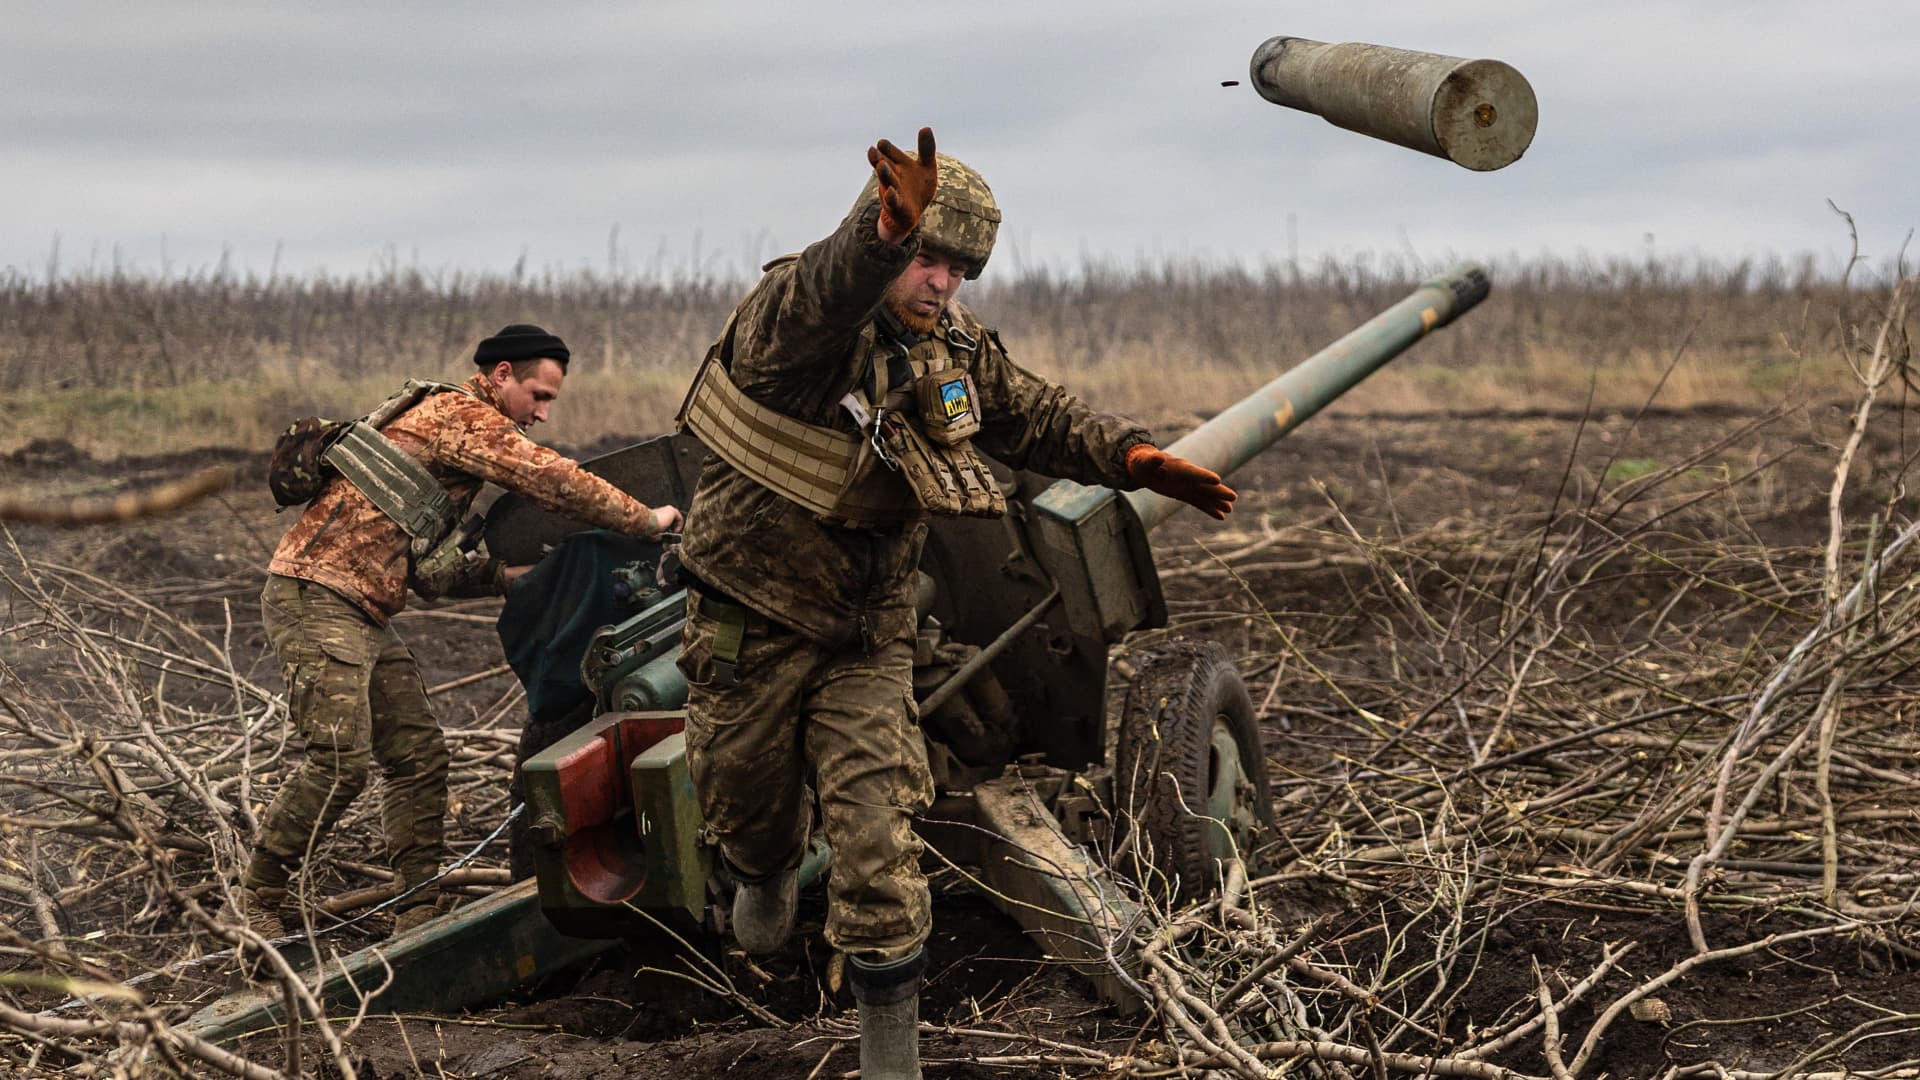 A Ukrainian serviceman of an artillery unit throws an empty shell as soldiers fire toward Russian positions on the outskirts of Bakhmut, in eastern Ukraine, on Dec. 30, 2022.